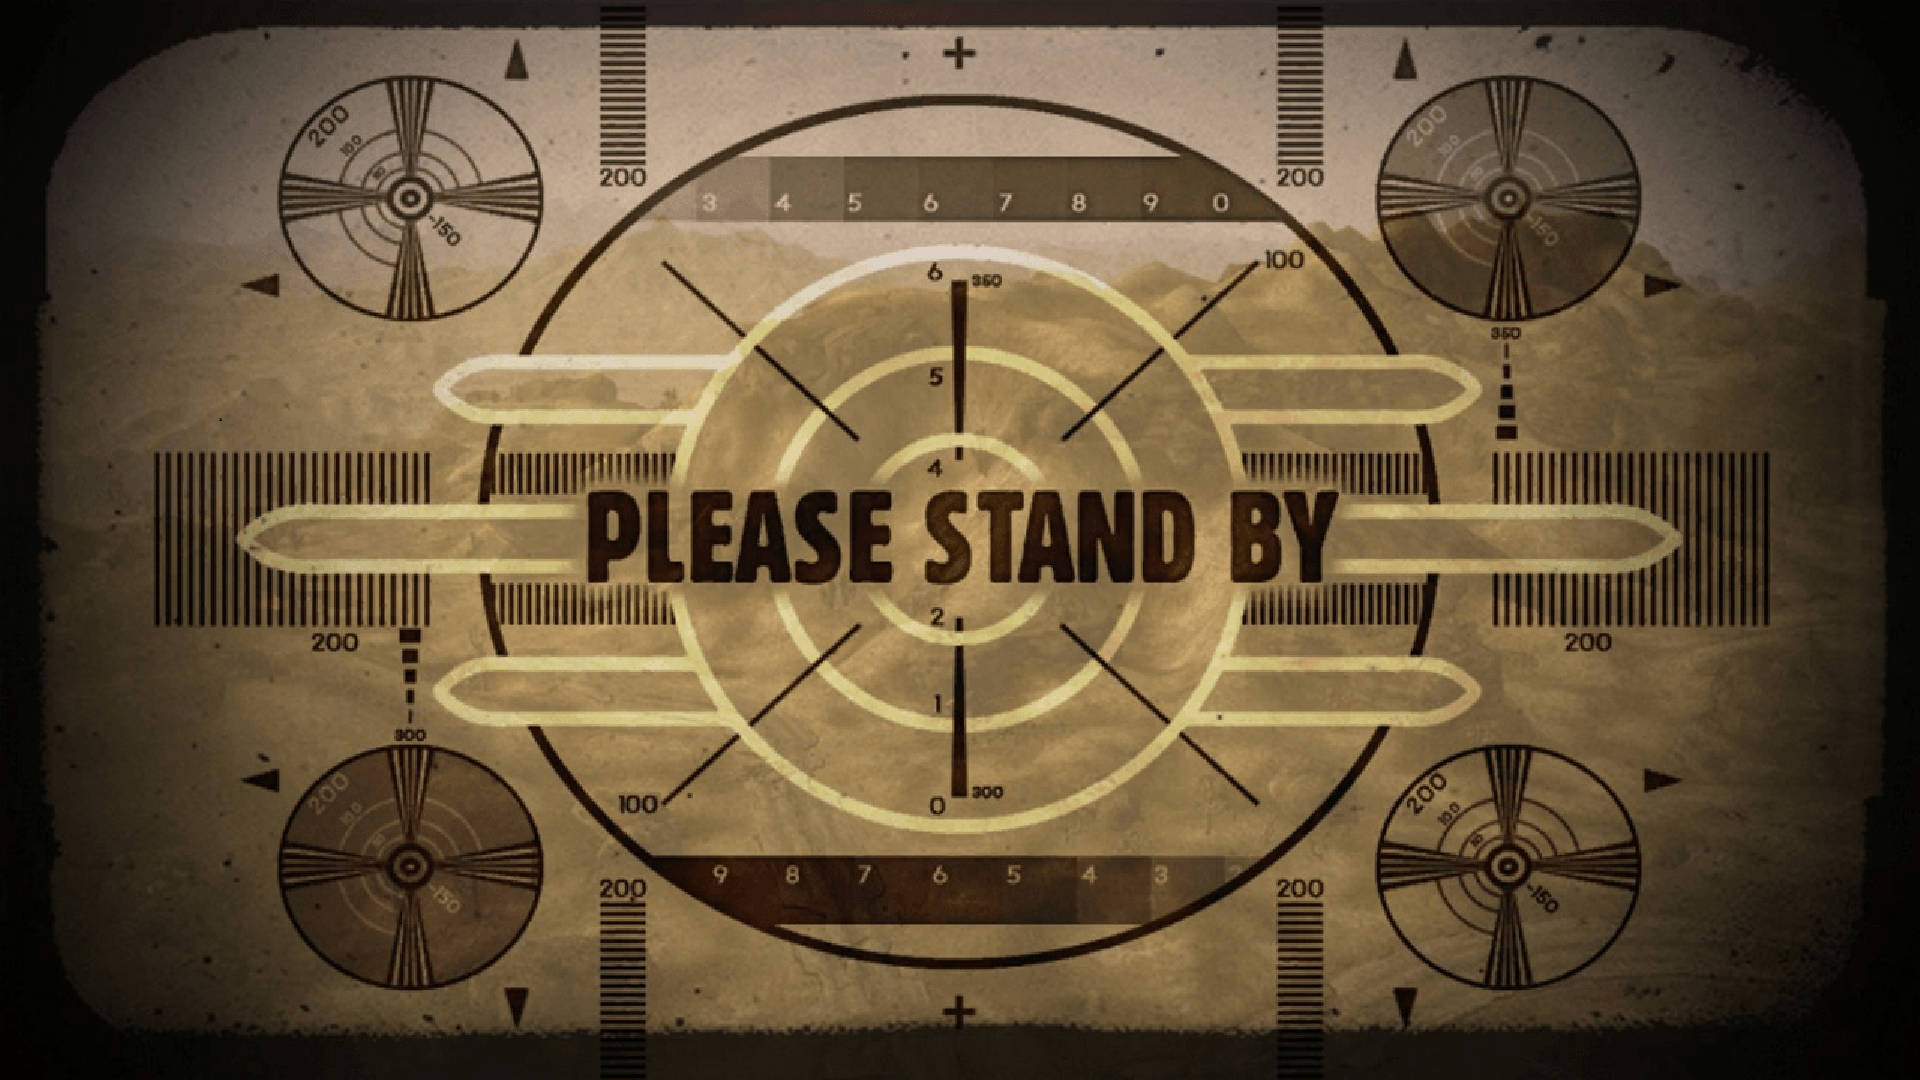 Caption: Vintage Please Stand By Screen With Fallout Reference